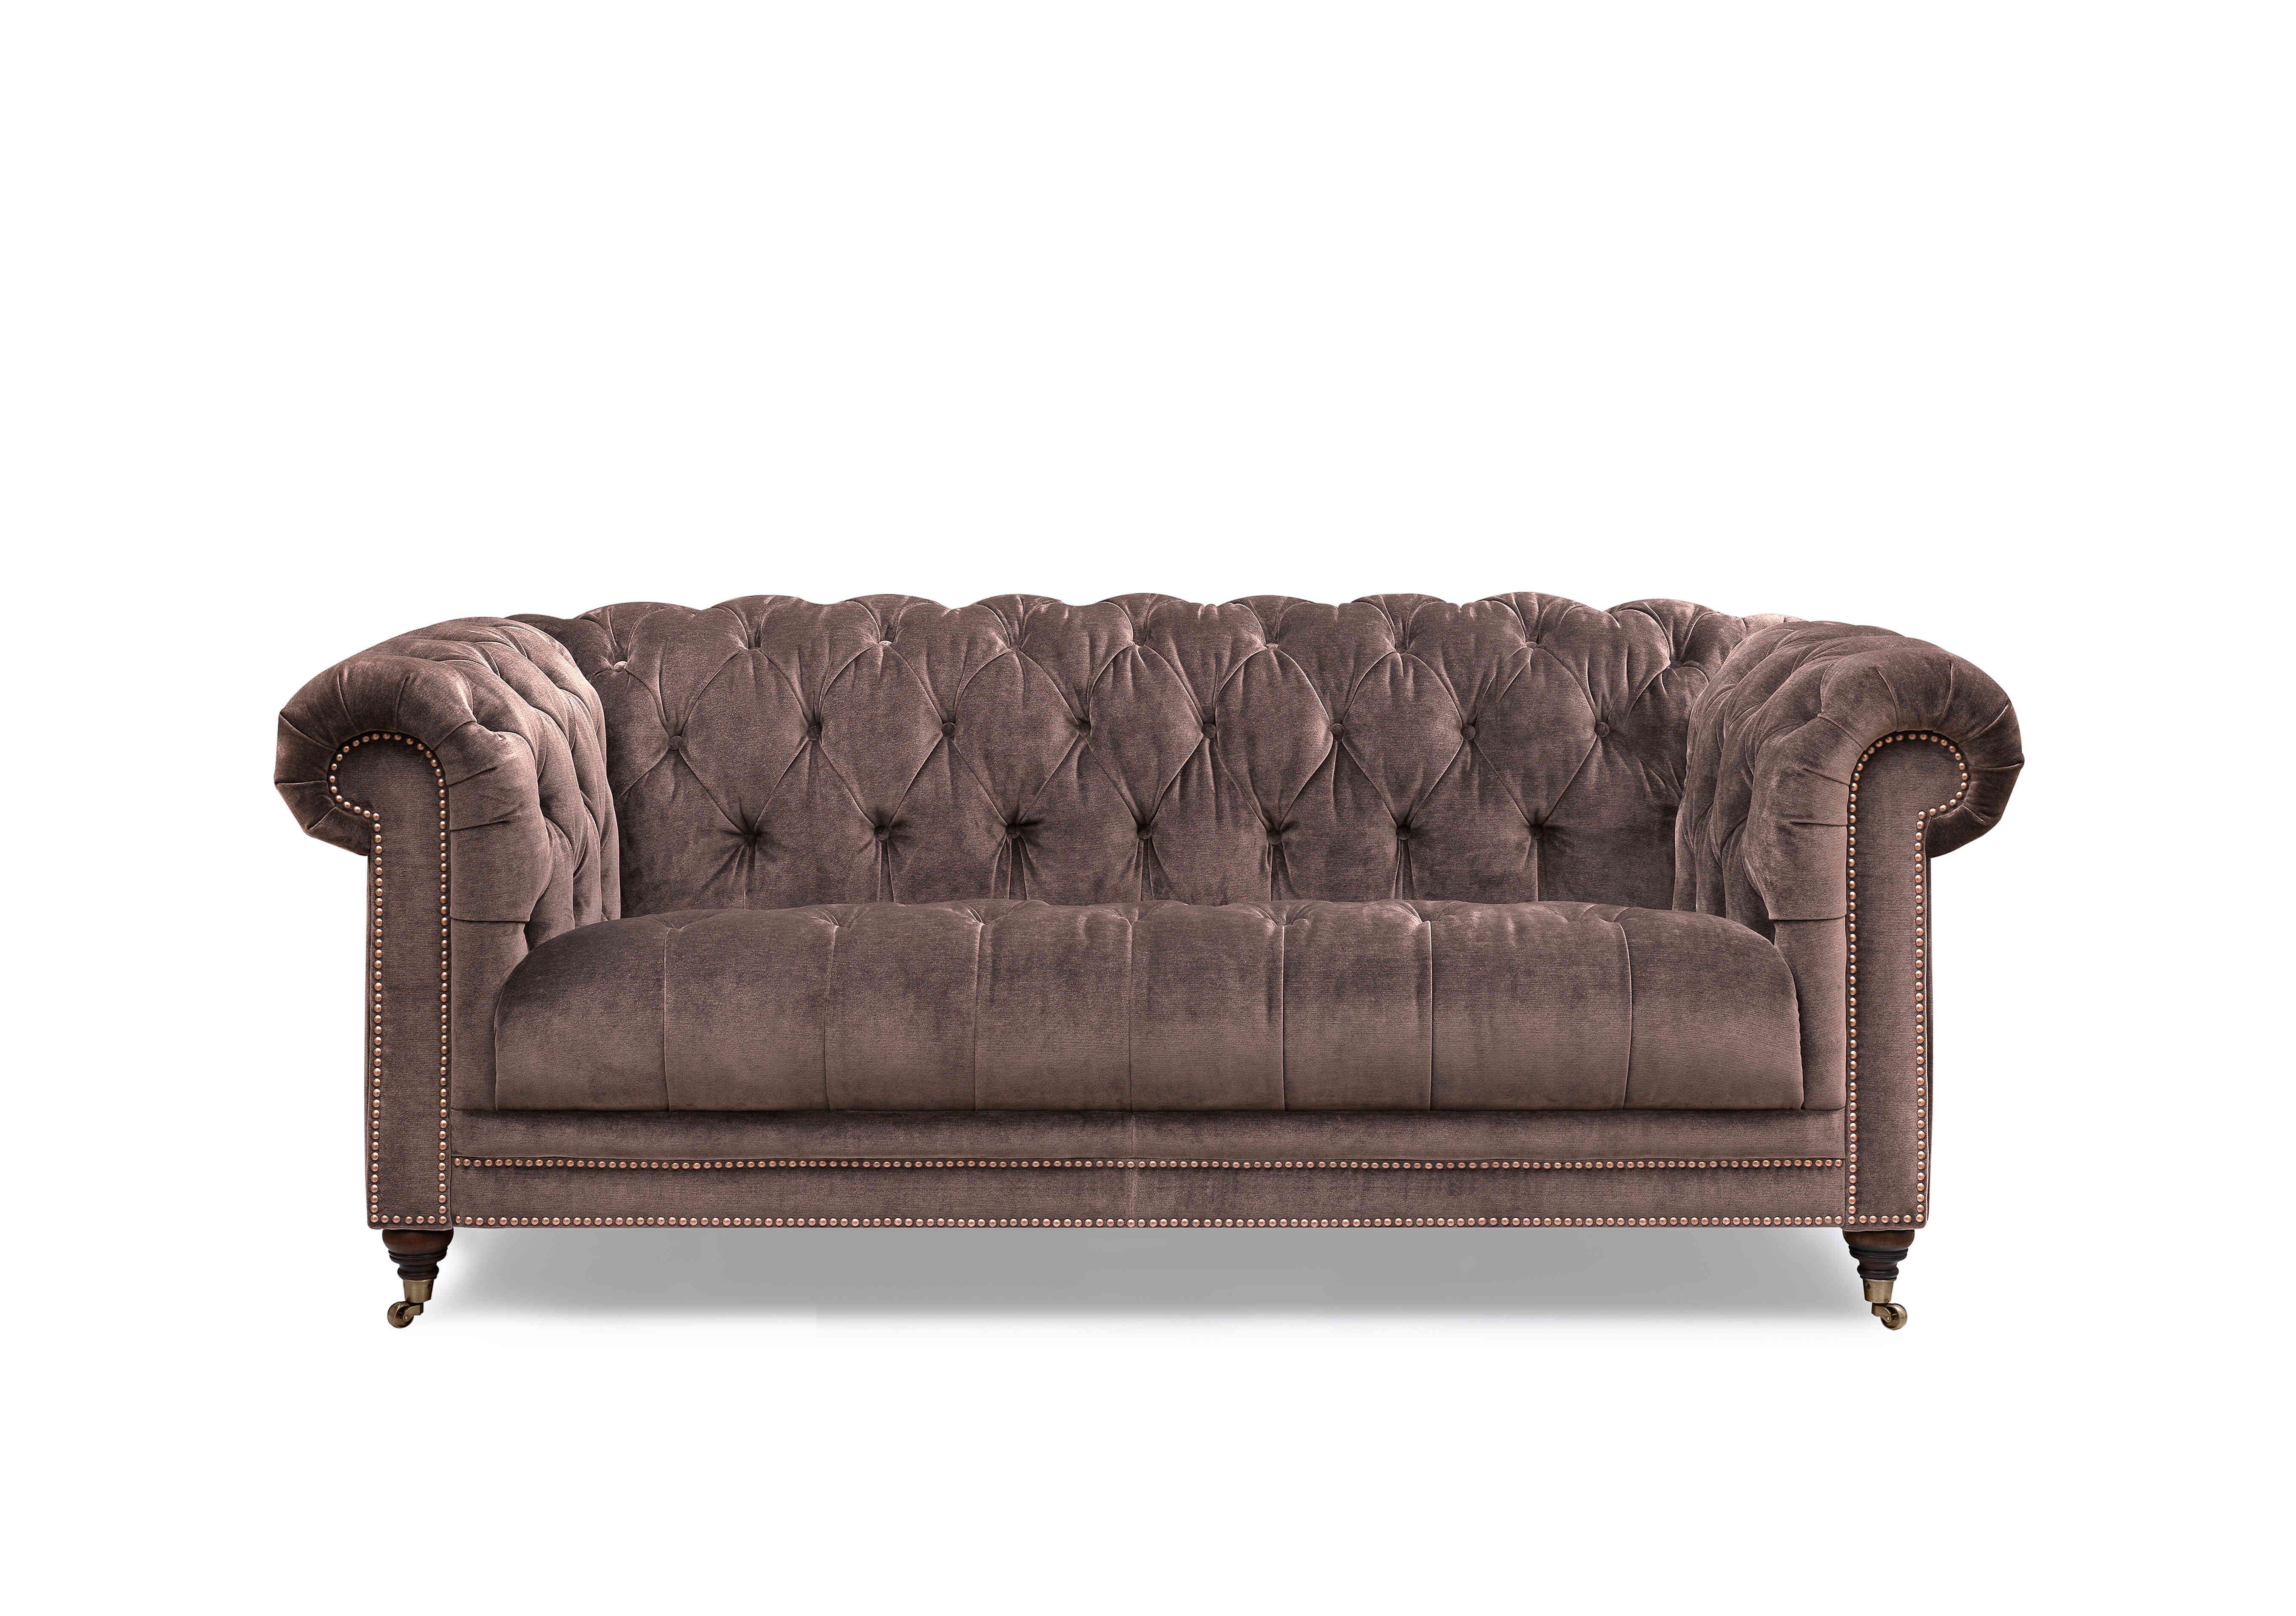 Walter 3 Seater Fabric Chesterfield Sofa in X3y1-W023 Antler on Furniture Village